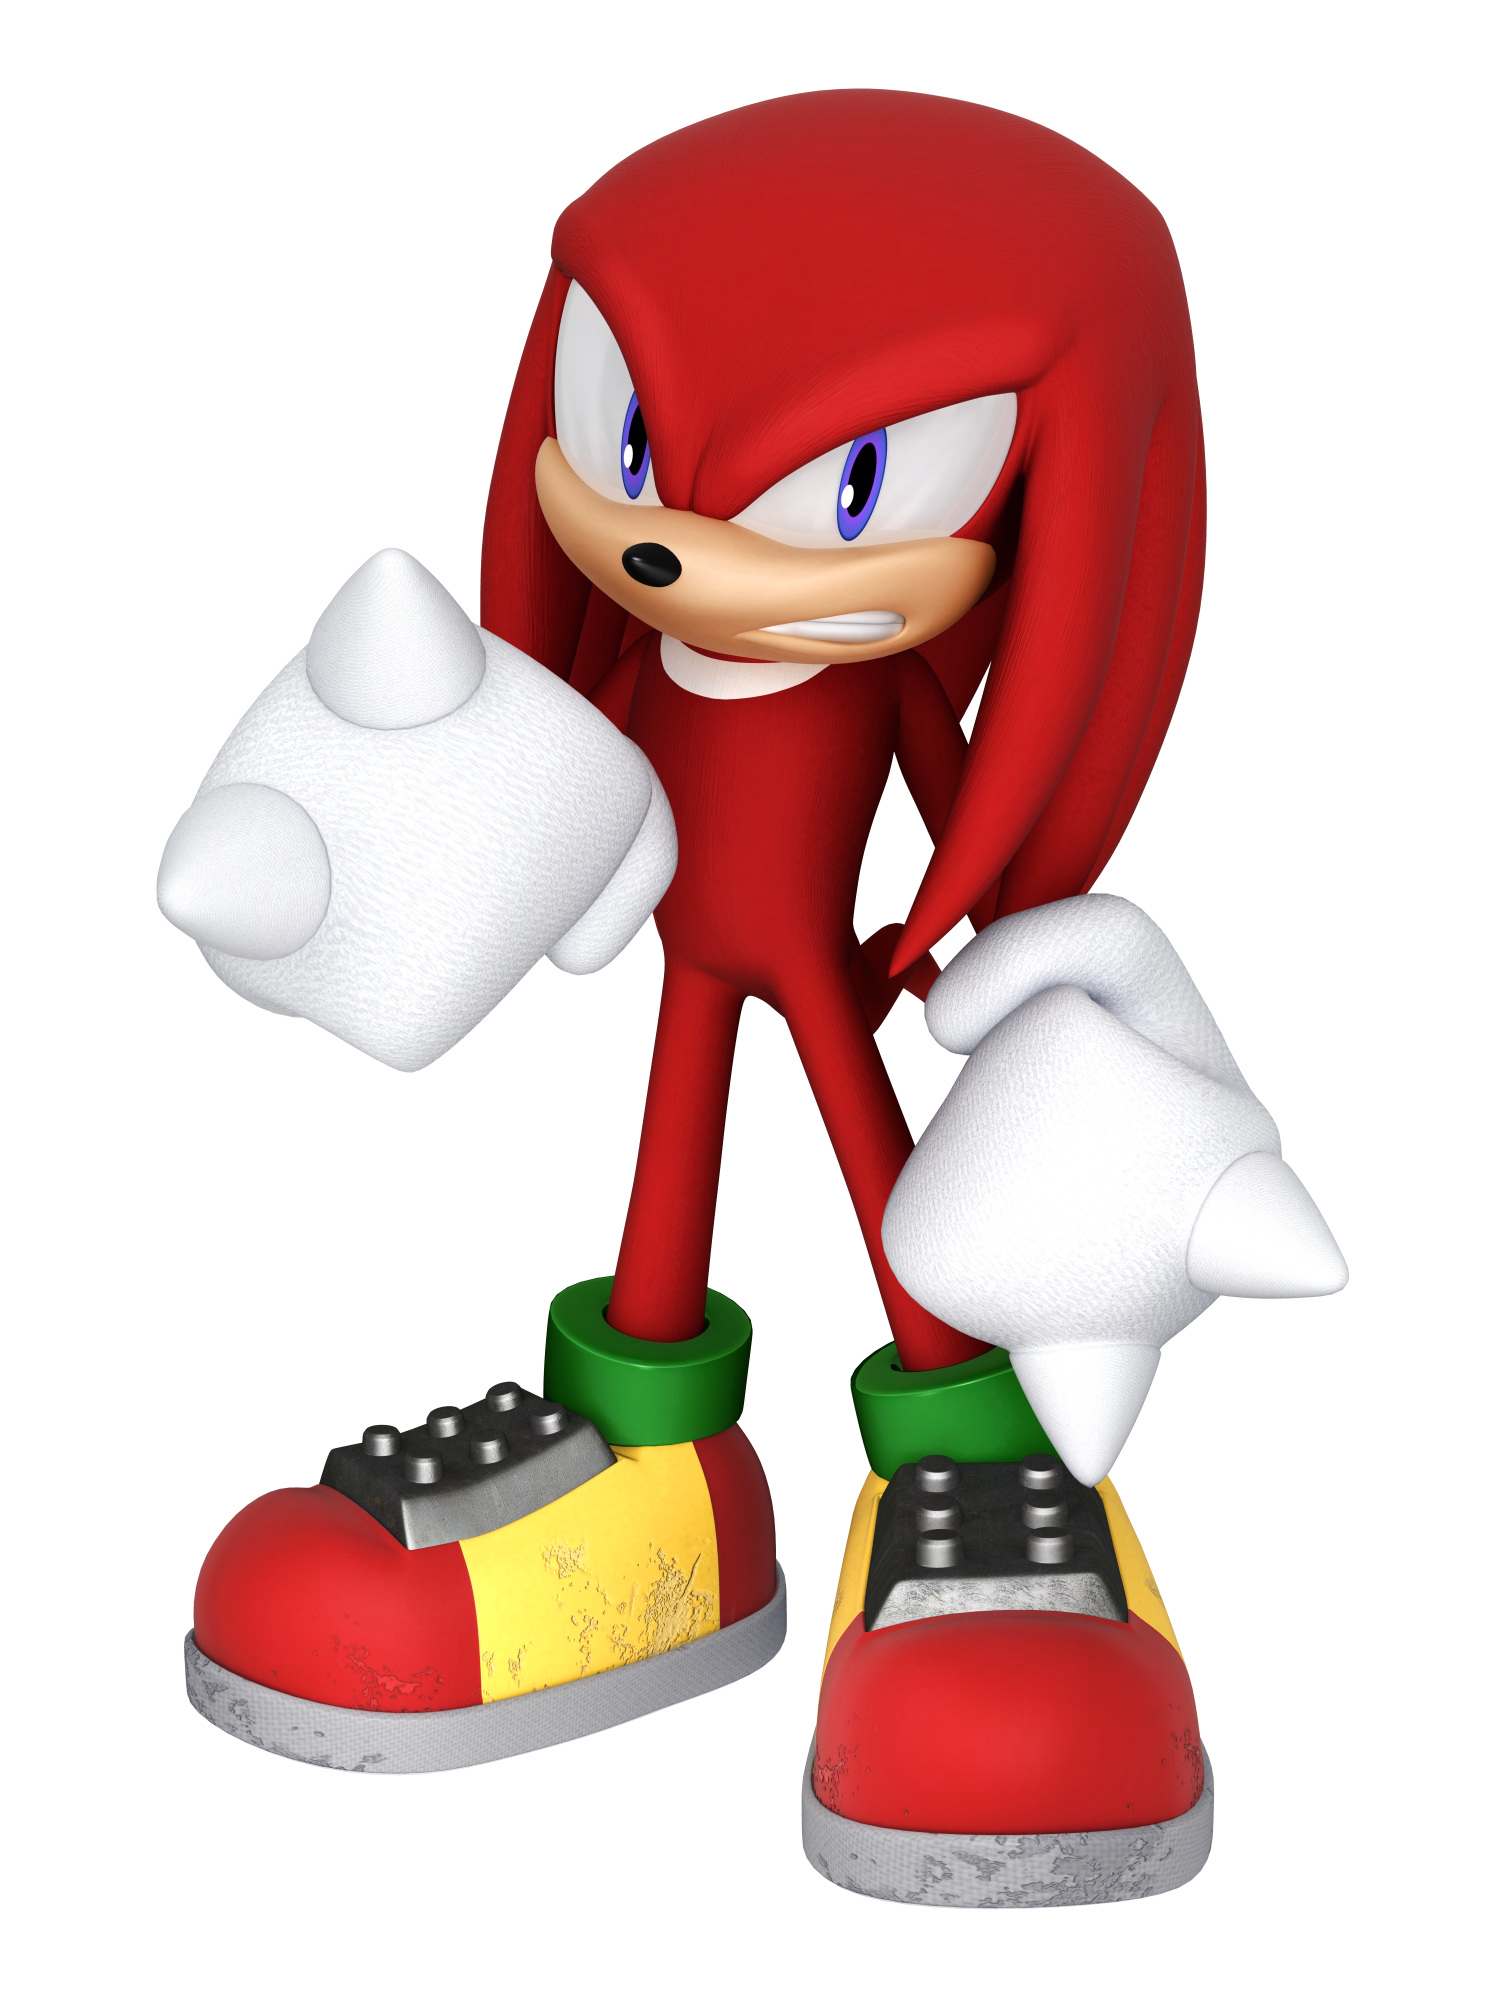 Knuckles the echidna game